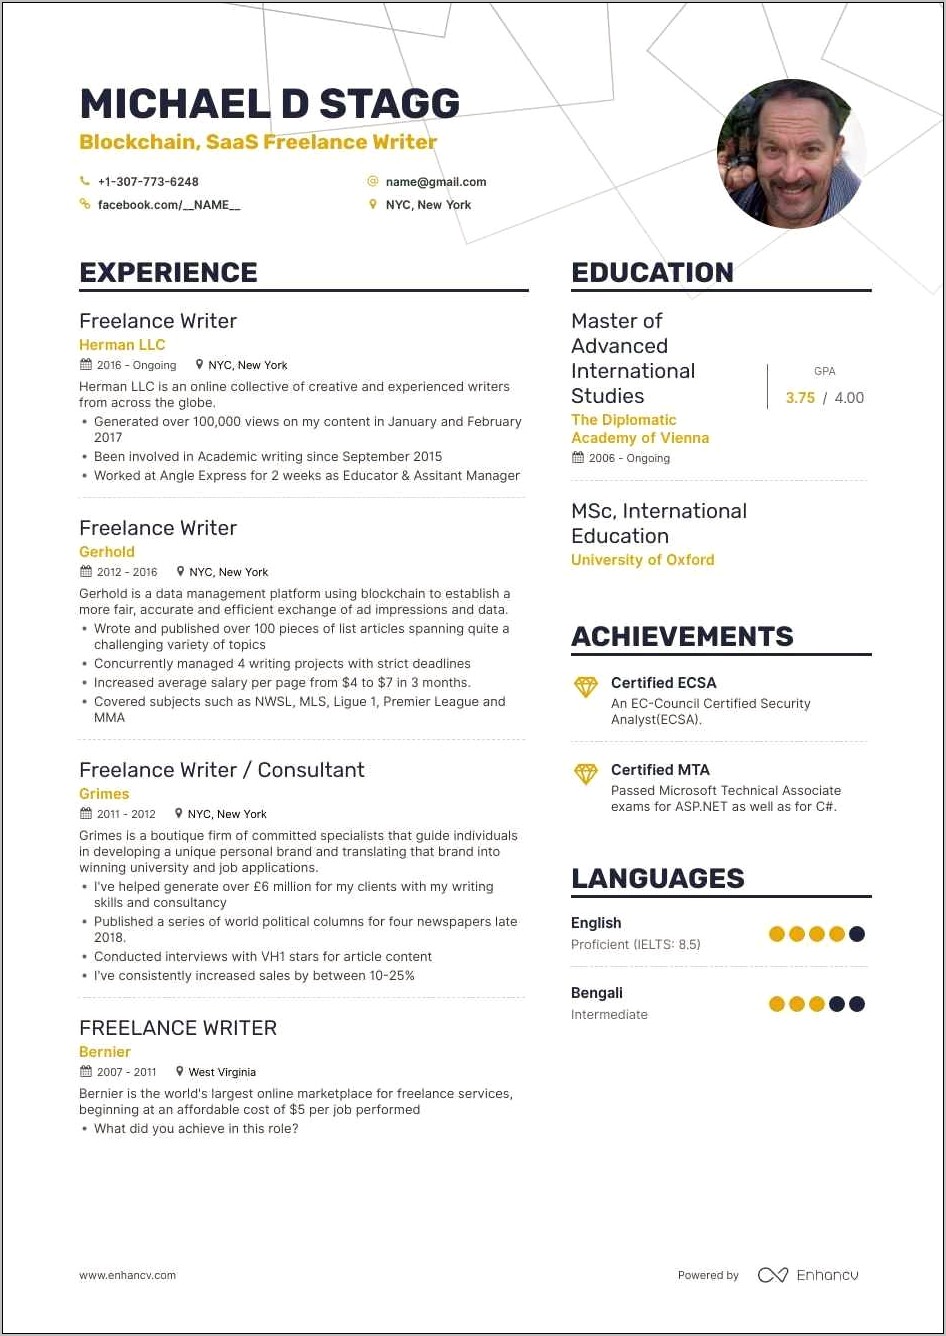 Experience As A Creative Writer Resume